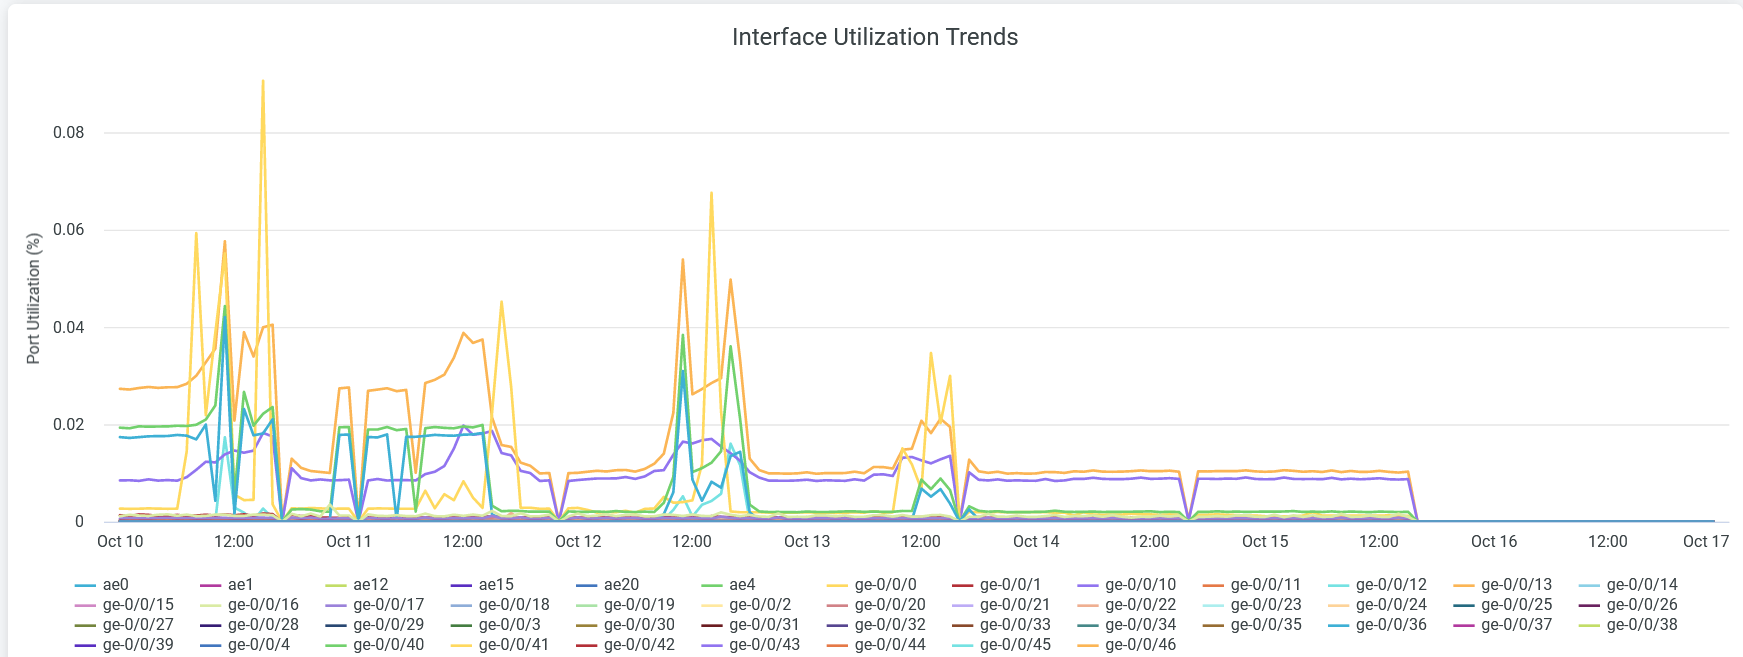 Interface Traffic Trends